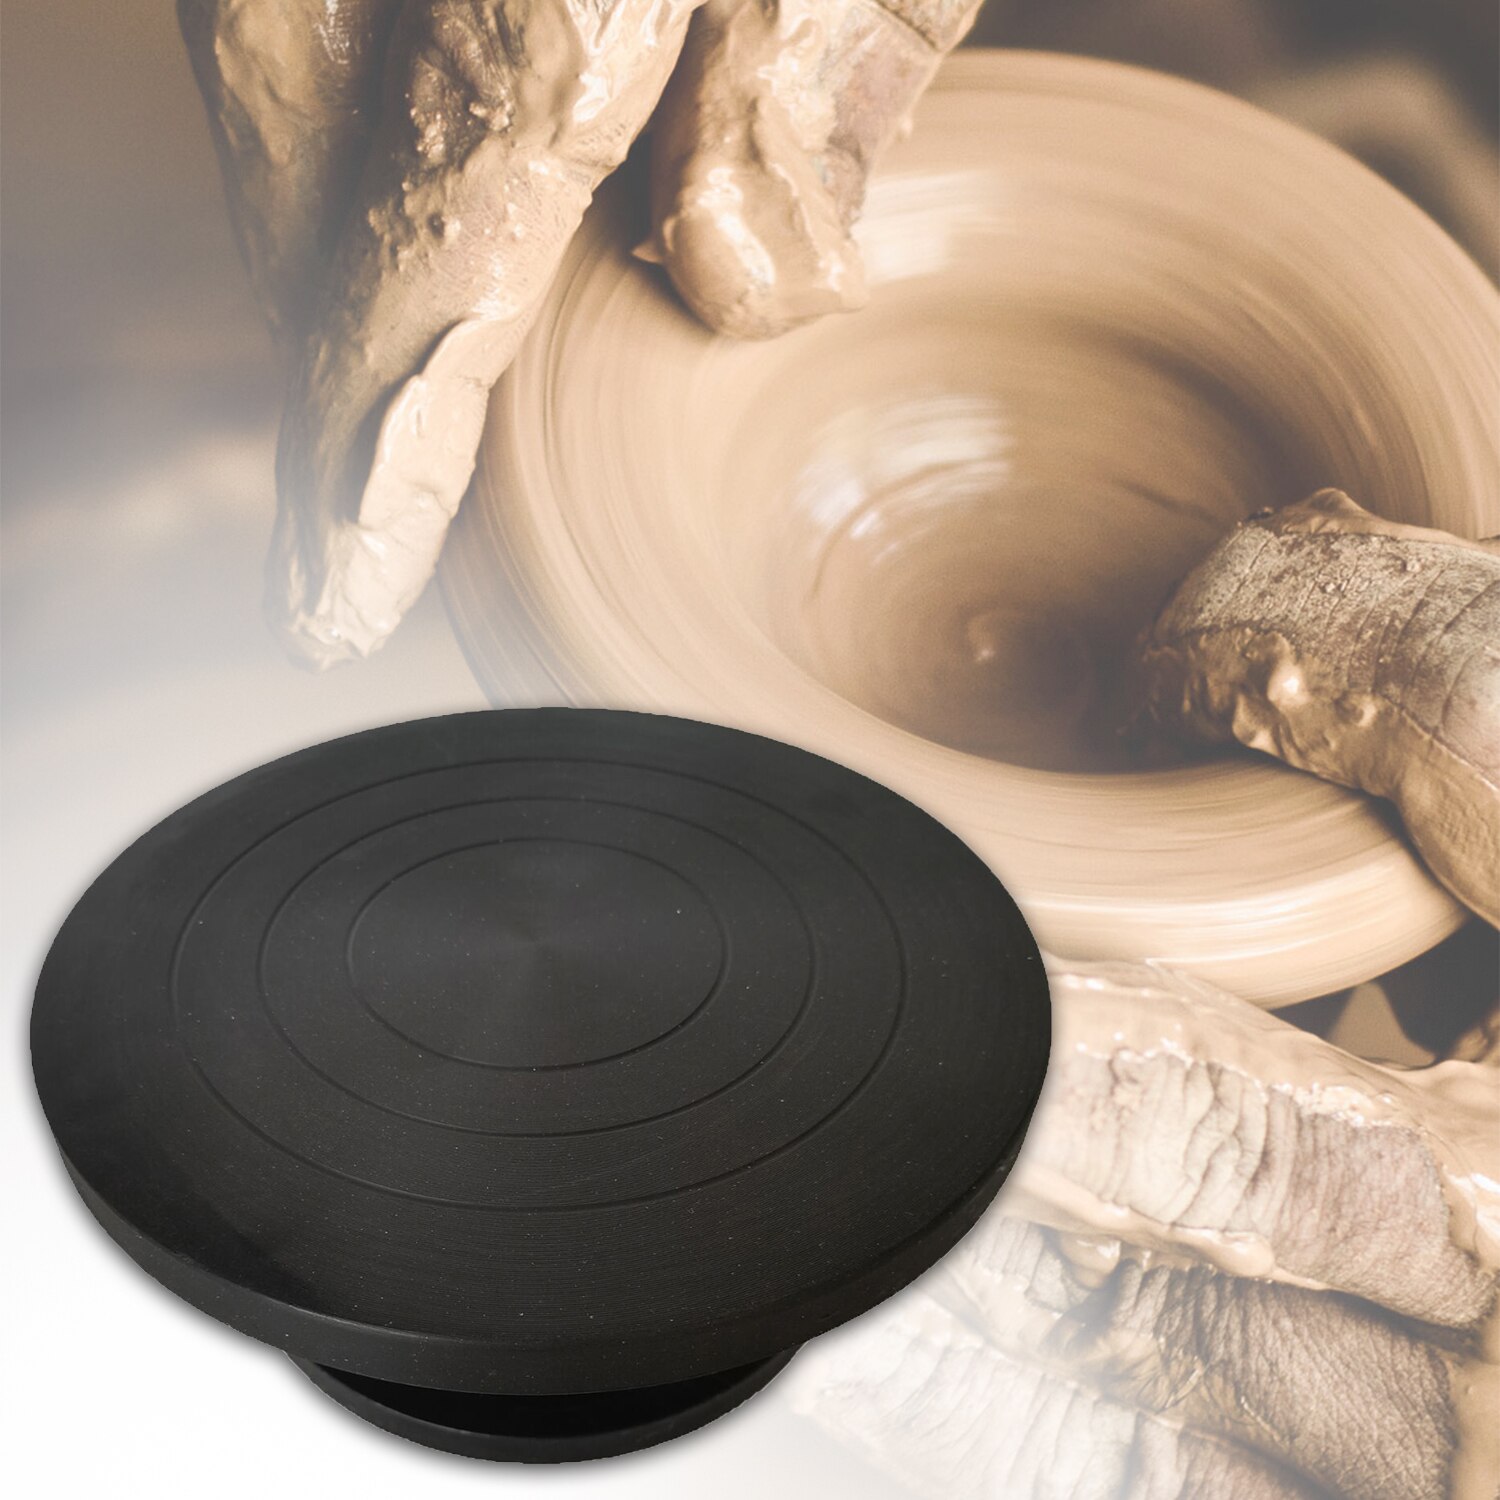 Art Supply 10in Diameter Sculpting Wheel Mini Clay Making Pottery Wheel Turntable with Ball Bearings Pottery Wheel Pottery